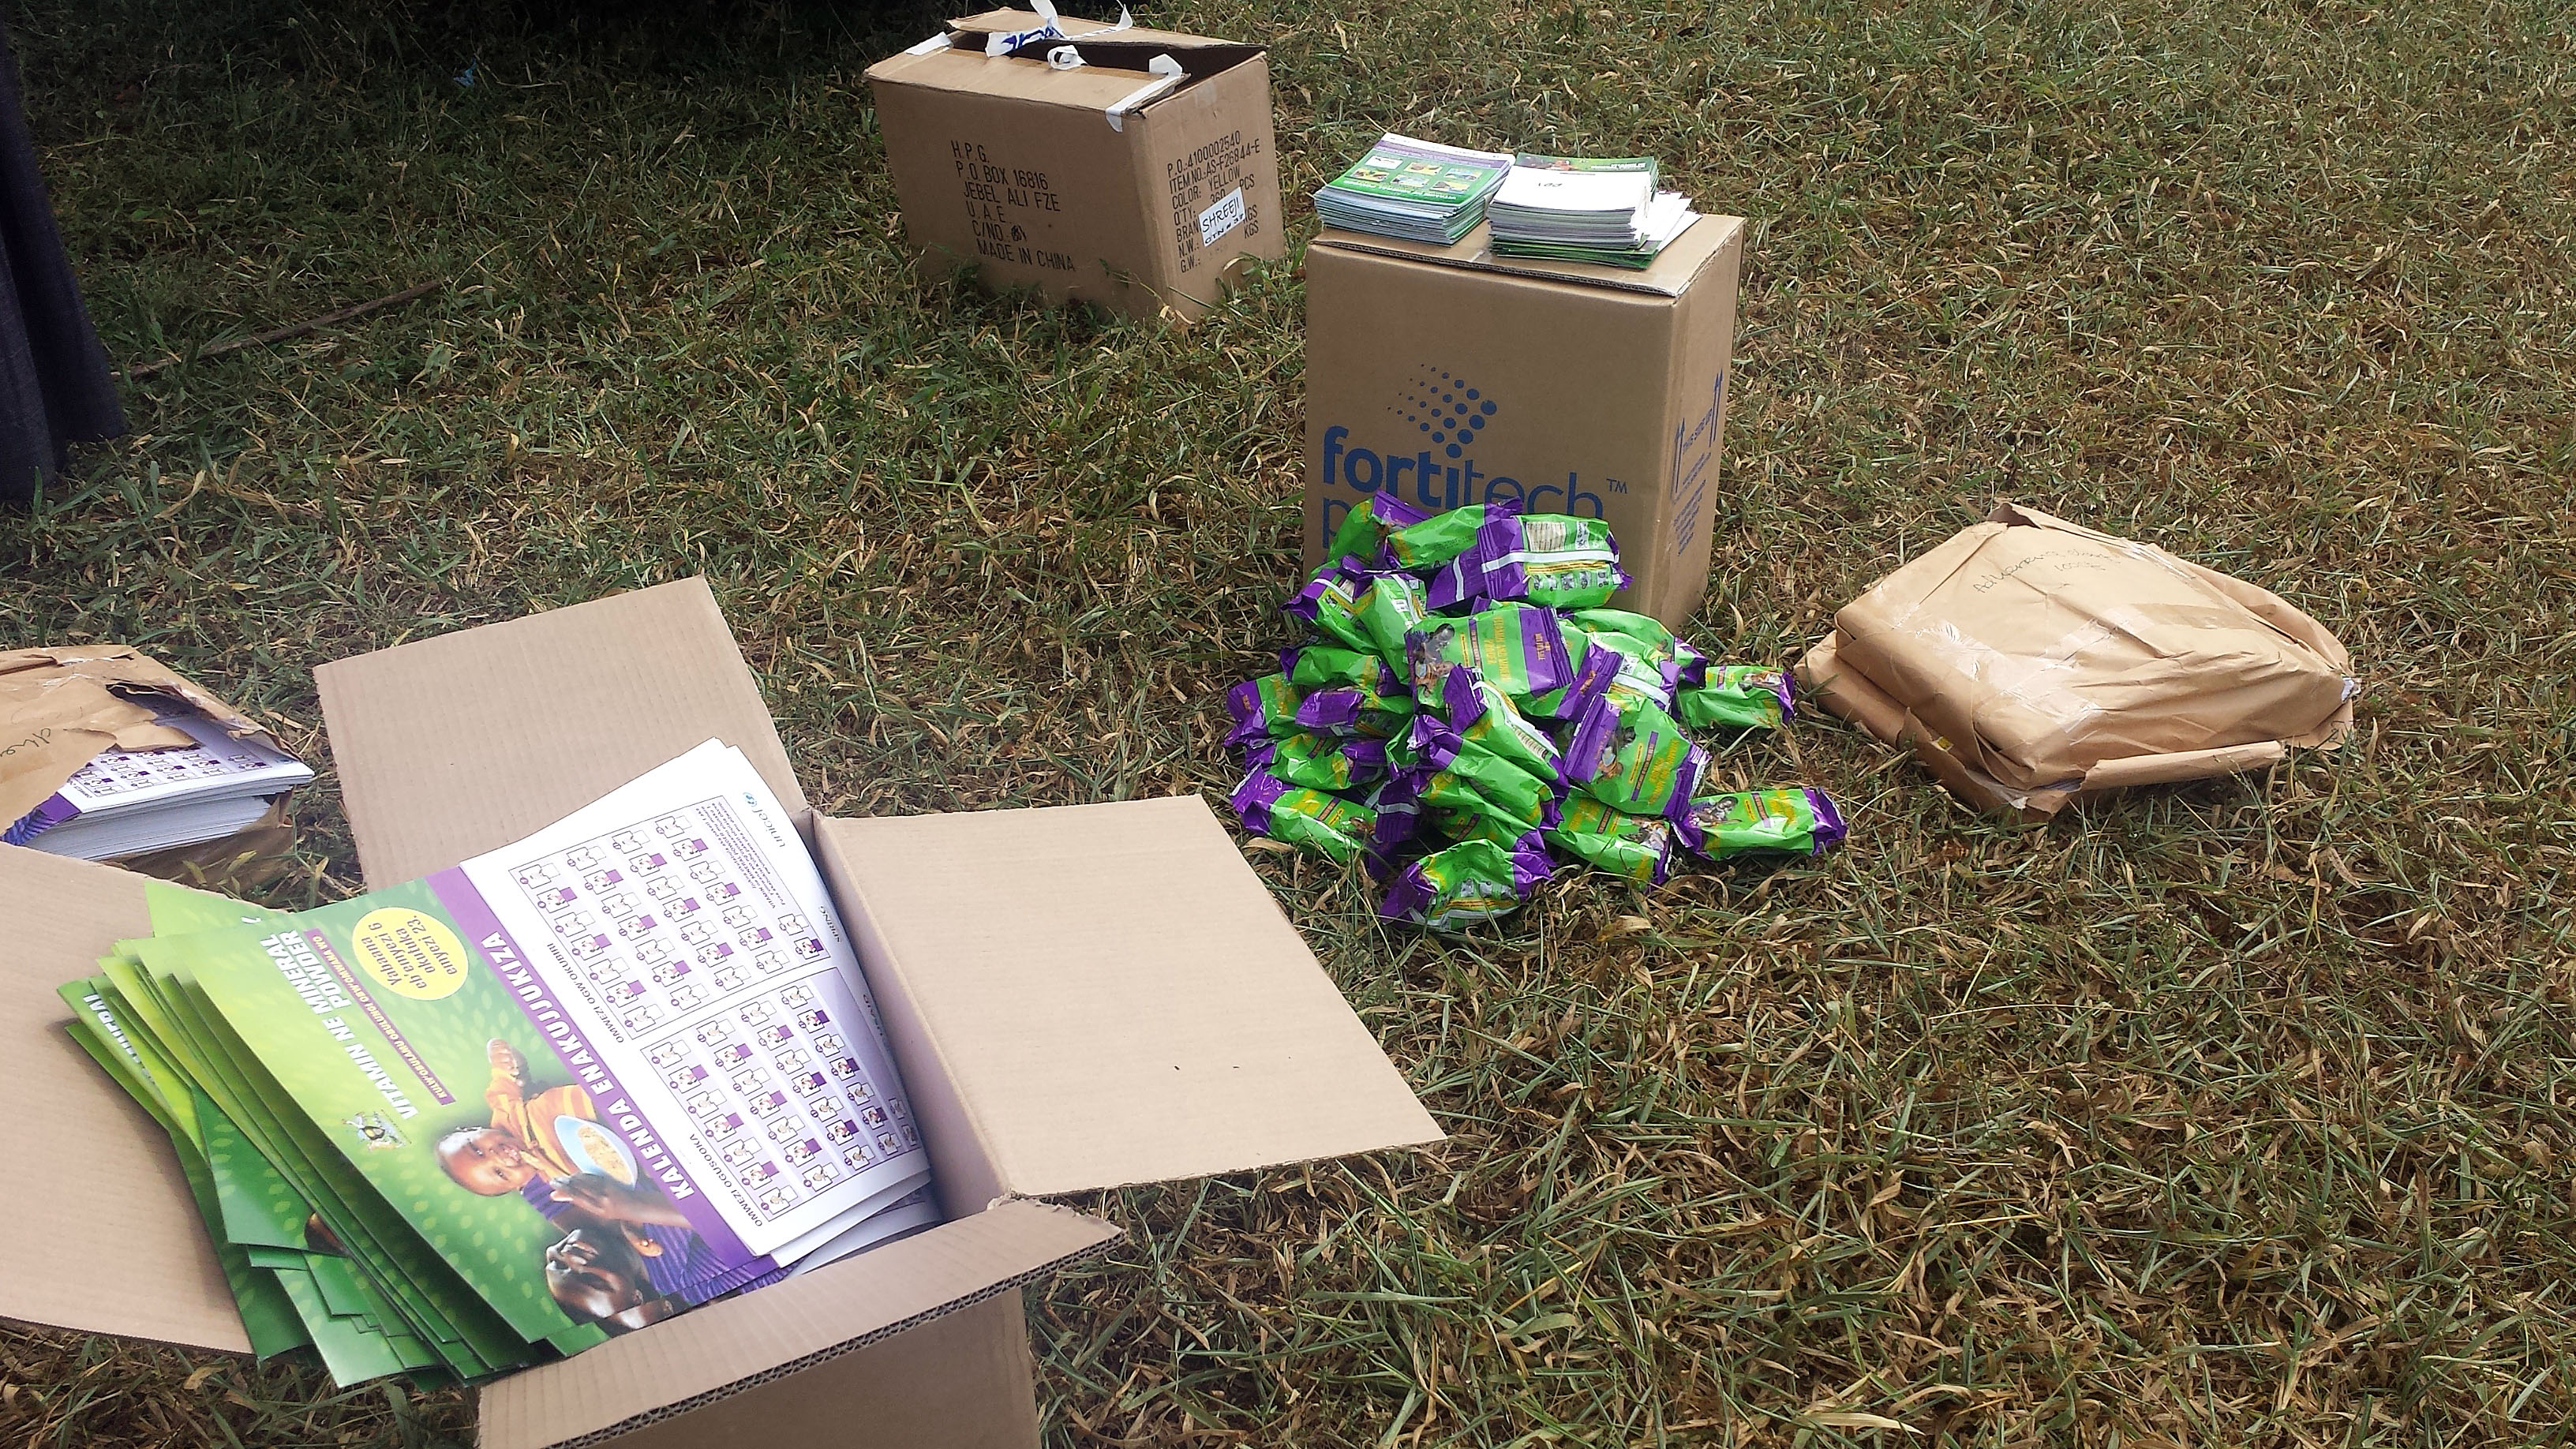 There are many materials to help with MNP distribution: adherence calendars (foreground), a pile of 60-day packaged supplies of MNPs (middle), boxes holding  MNP stickers and reminder cards (behind MNP pile). All of these materials, in addition to the M&E tools, are brought to the VHTs and health workers during distributions. After VHTs return to their villages, they distribute these materials to households, while health workers distribute these materials straight from the health facilities.